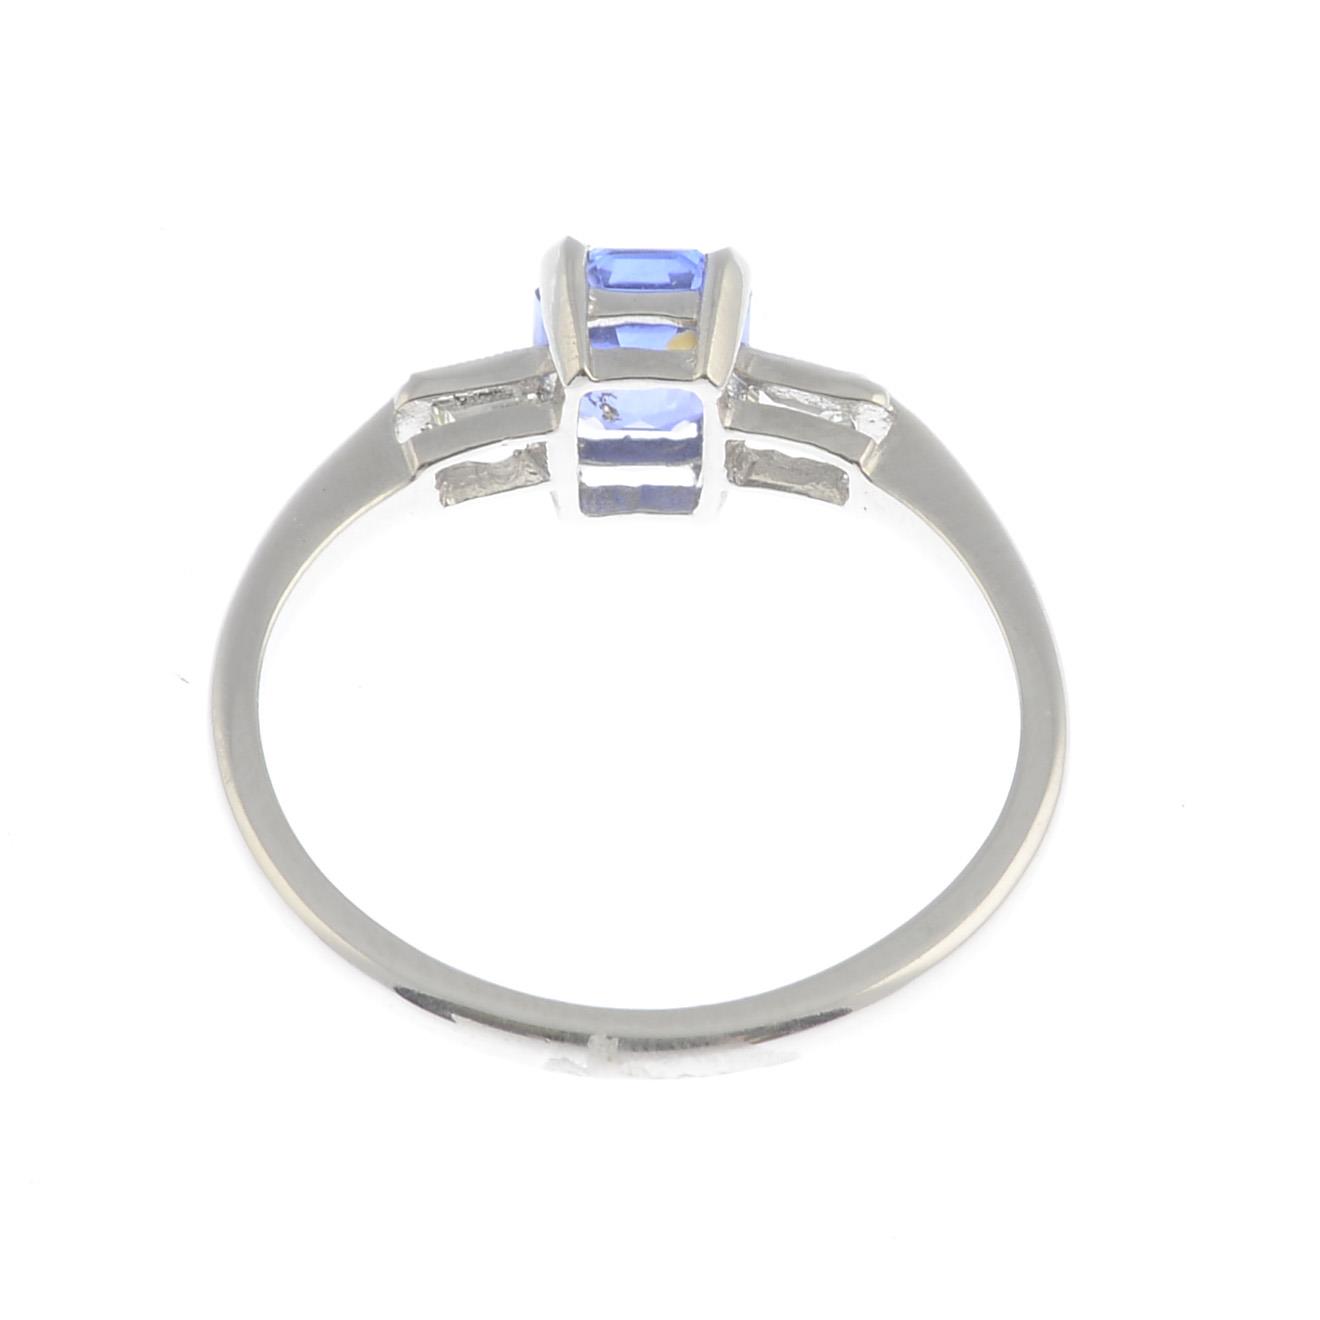 A sapphire and diamond dress ring.Sapphire weight 0.85ct. - Image 2 of 3